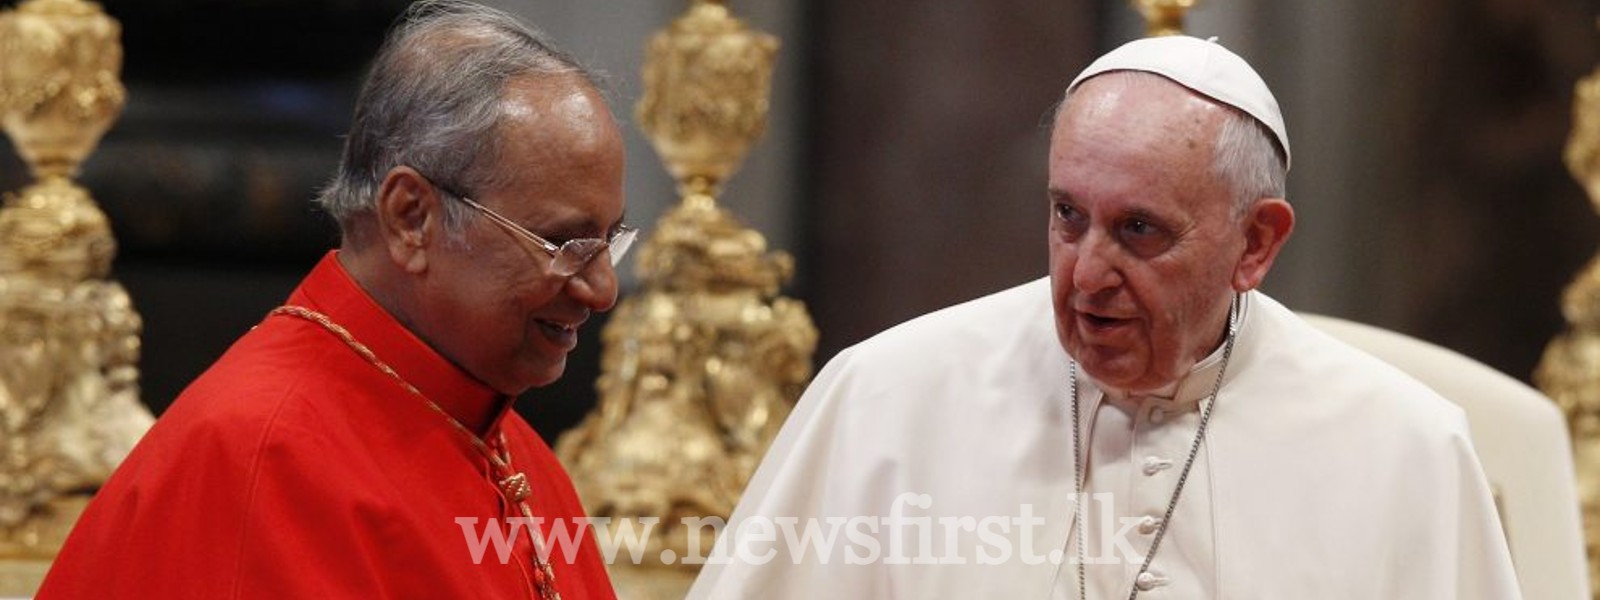 Cardinal meets His Holiness the Pope at the Vatican